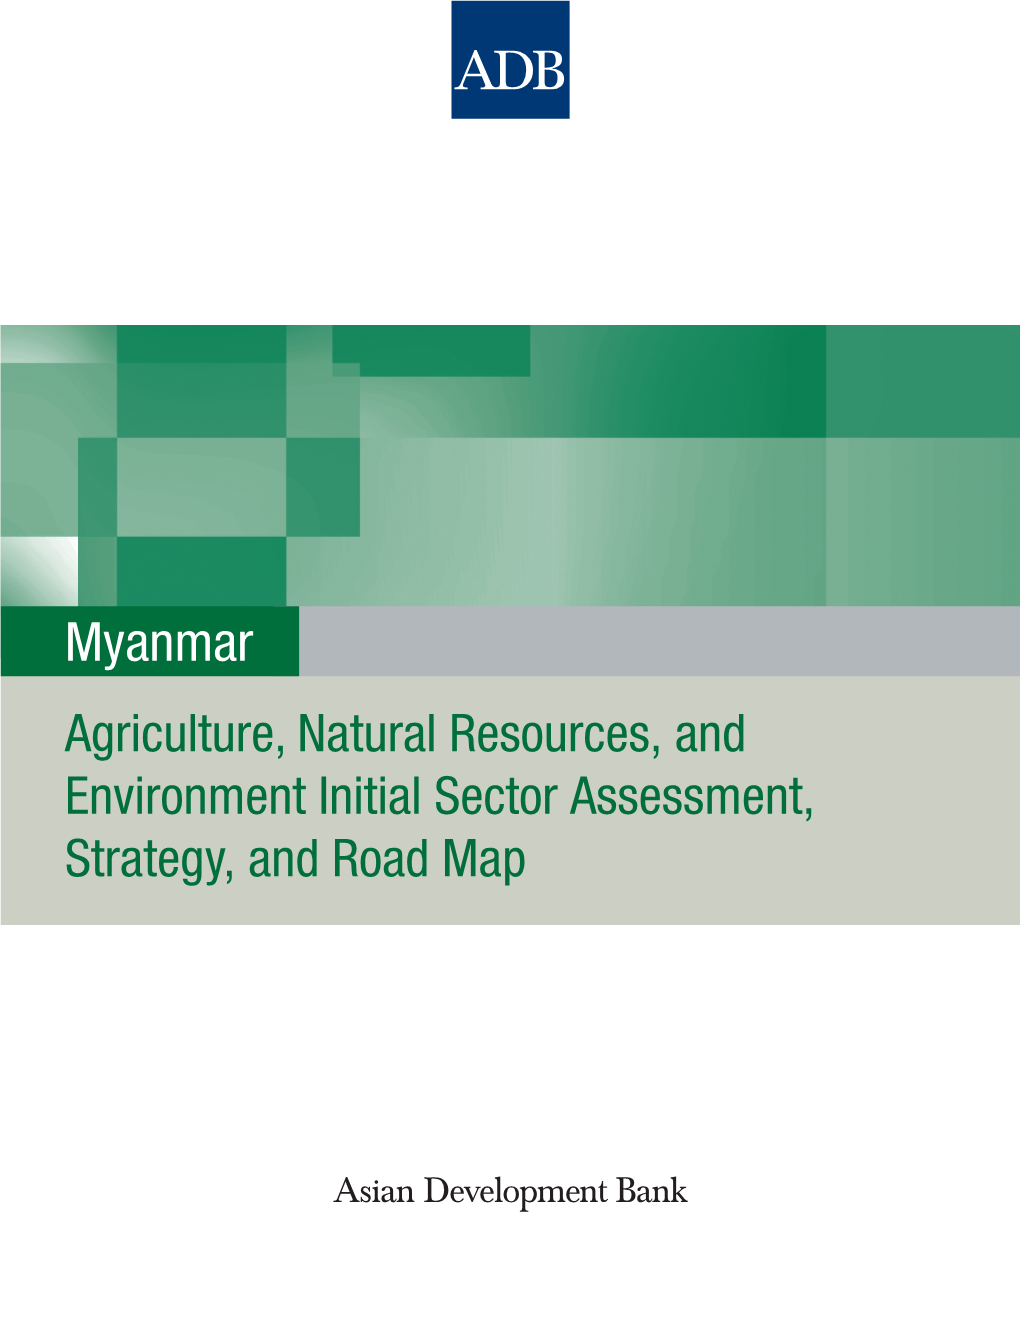 Myanmar: Agriculture, Natural Resources, and Environment Initial Sector Assessment, Strategy, and Road Map